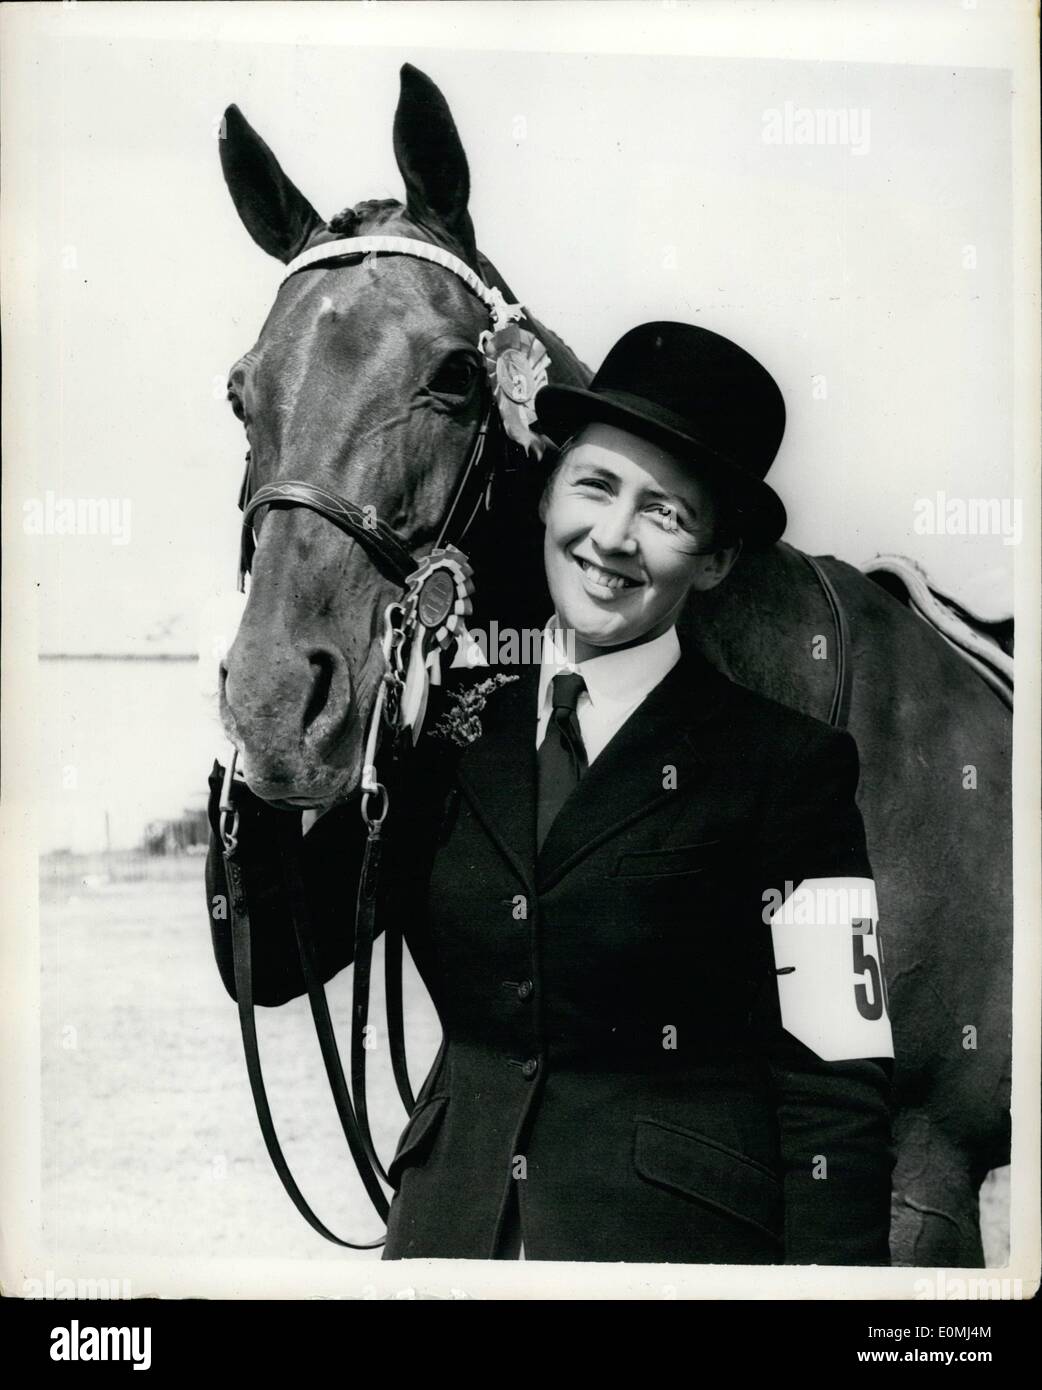 Aug. 08, 1955 - The Royal Lancs Show..Over Pound1,000 Prizes In Four Years.. Keystone Photo Shows:- Miss Paula Wainwright (22) of Dunsley Dene, near Stourbridge, Worcs., with her Champion Hack ''Lovely Boy'' which in four years has won Pound1,000 in the show ring..Pauls has just gained her B.Sc. Agriculture, at Reading university and is leaving soon for two years study of Agriculture in Australia and New Zealand..Seen at the Royal Lancs Show at Blackburn. Stock Photo